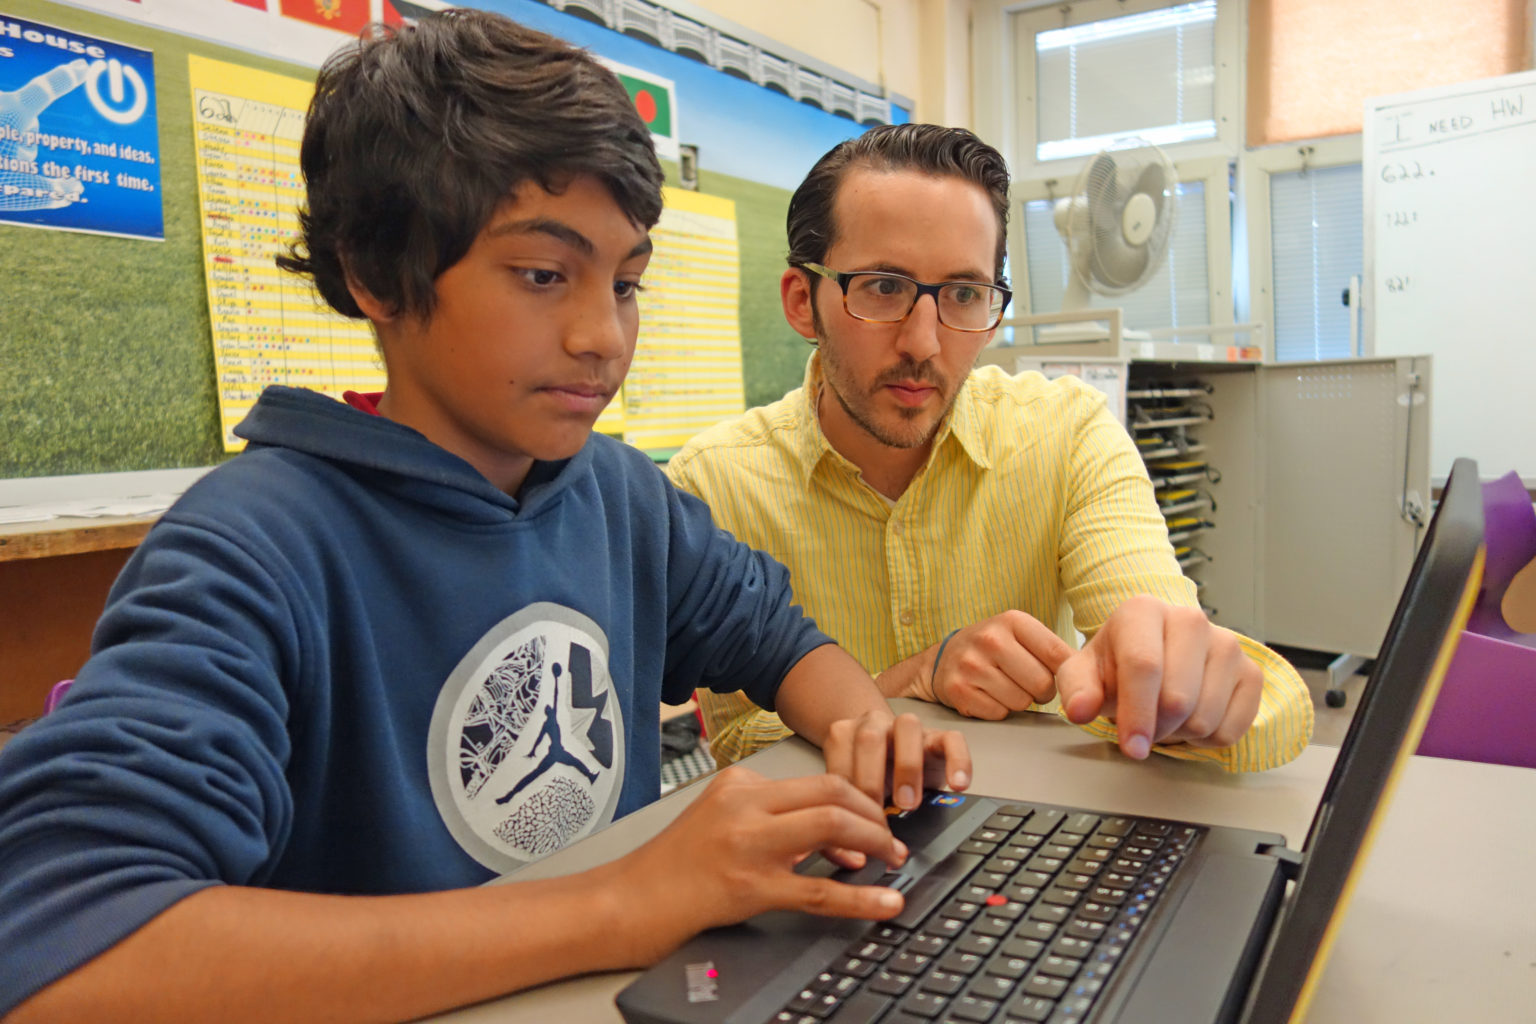 Teacher working with student on a computer